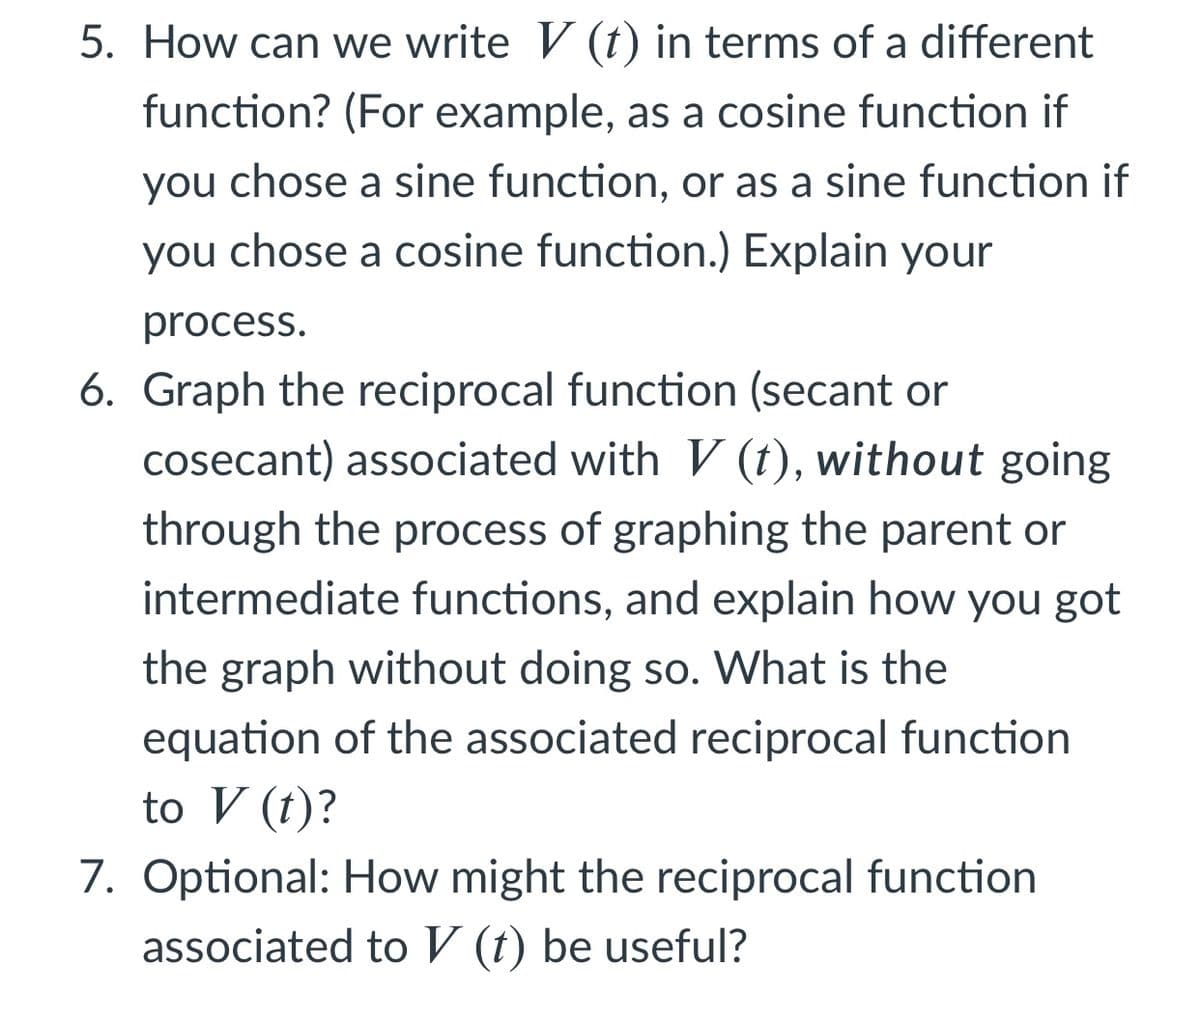 5. How can we write V (t) in terms of a different
function? (For example, as a cosine function if
you chose a sine function, or as a sine function if
you chose a cosine function.) Explain your
process.
6. Graph the reciprocal function (secant or
cosecant) associated with V (t), without going
through the process of graphing the parent or
intermediate functions, and explain how you got
the graph without doing so. What is the
equation of the associated reciprocal function
to V (t)?
7. Optional: How might the reciprocal function
associated to V (t) be useful?
